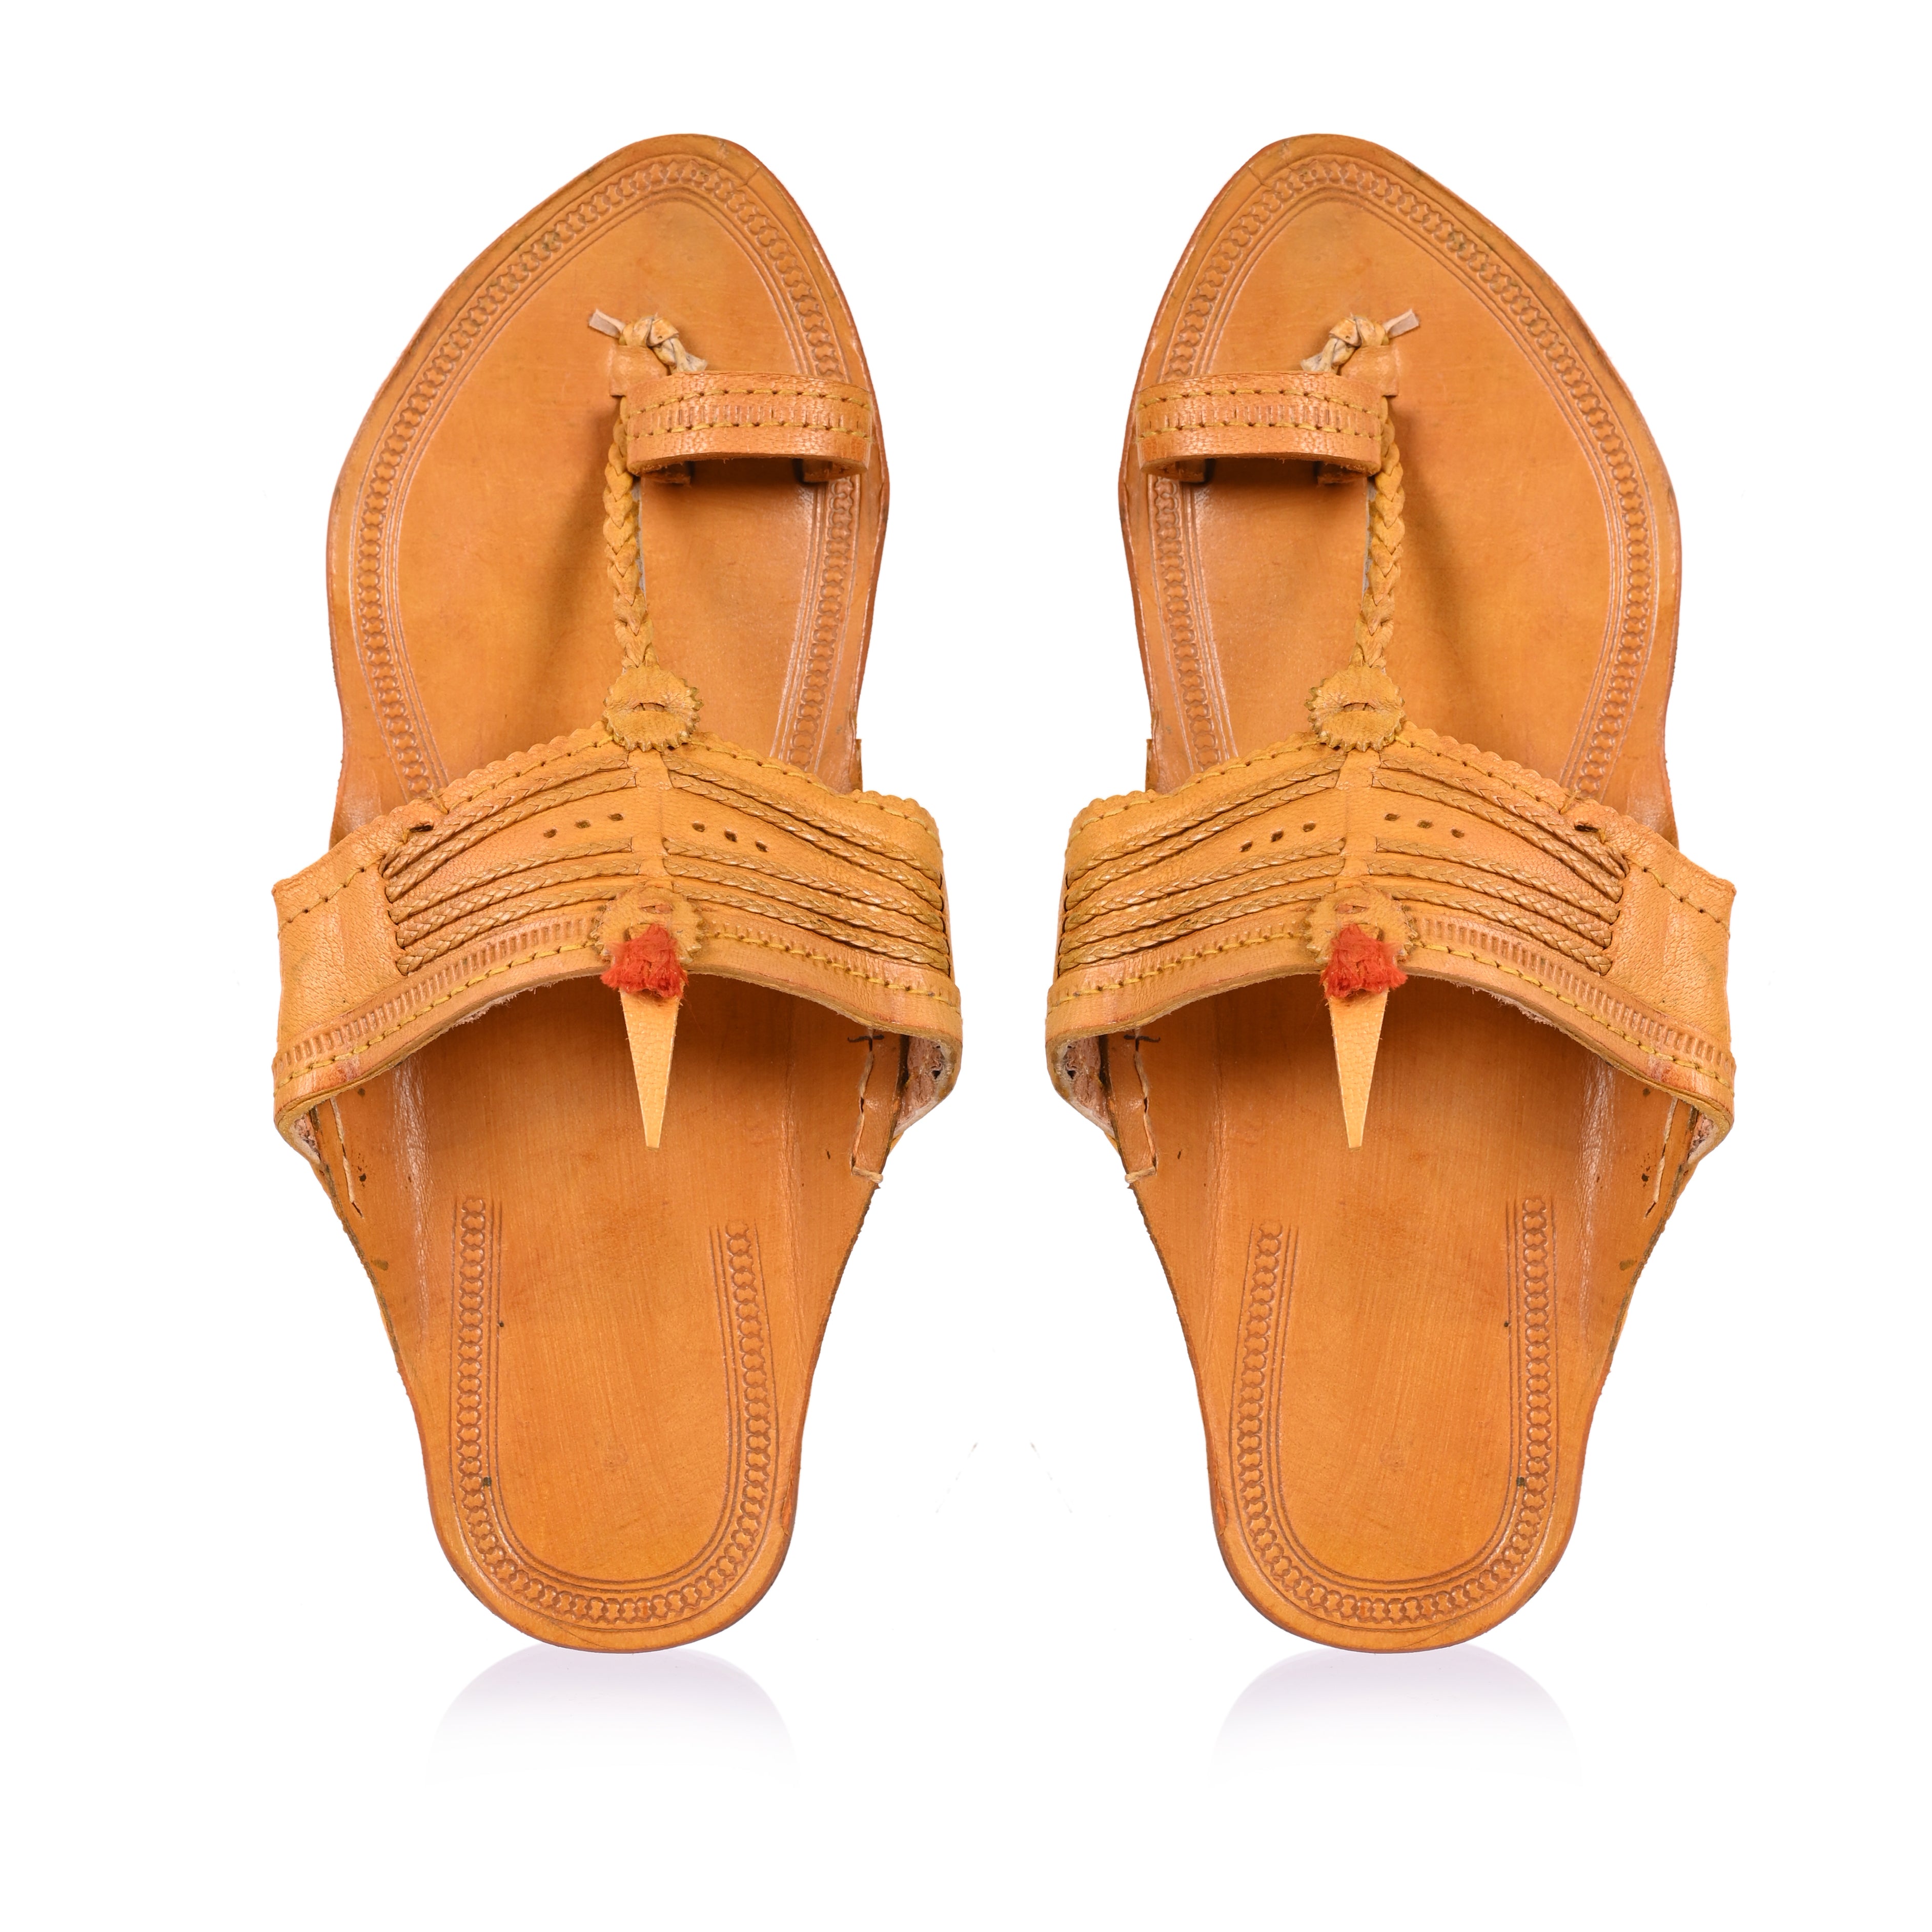 Pure Leather Chappal/Slippers For Men Kolhapuri